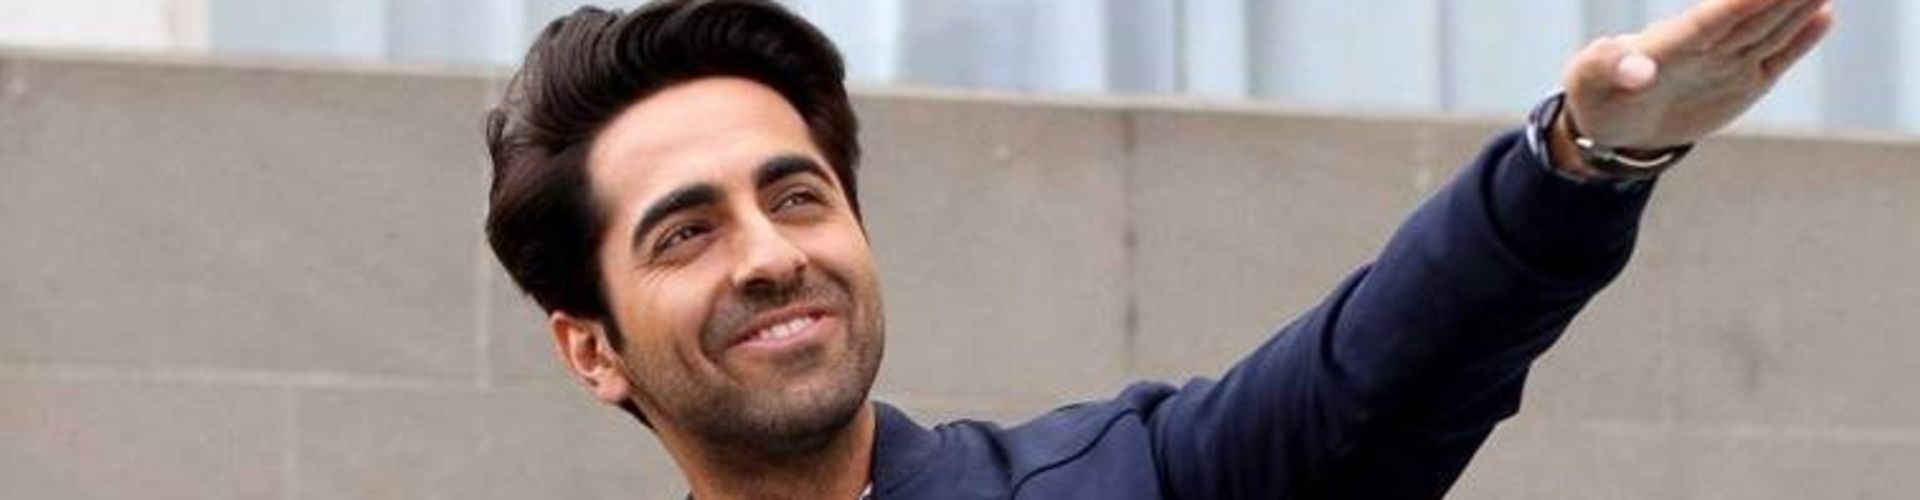 Not nervous this year for the double release with AndhaDhun and Badhai Ho says Ayushmann Khurana